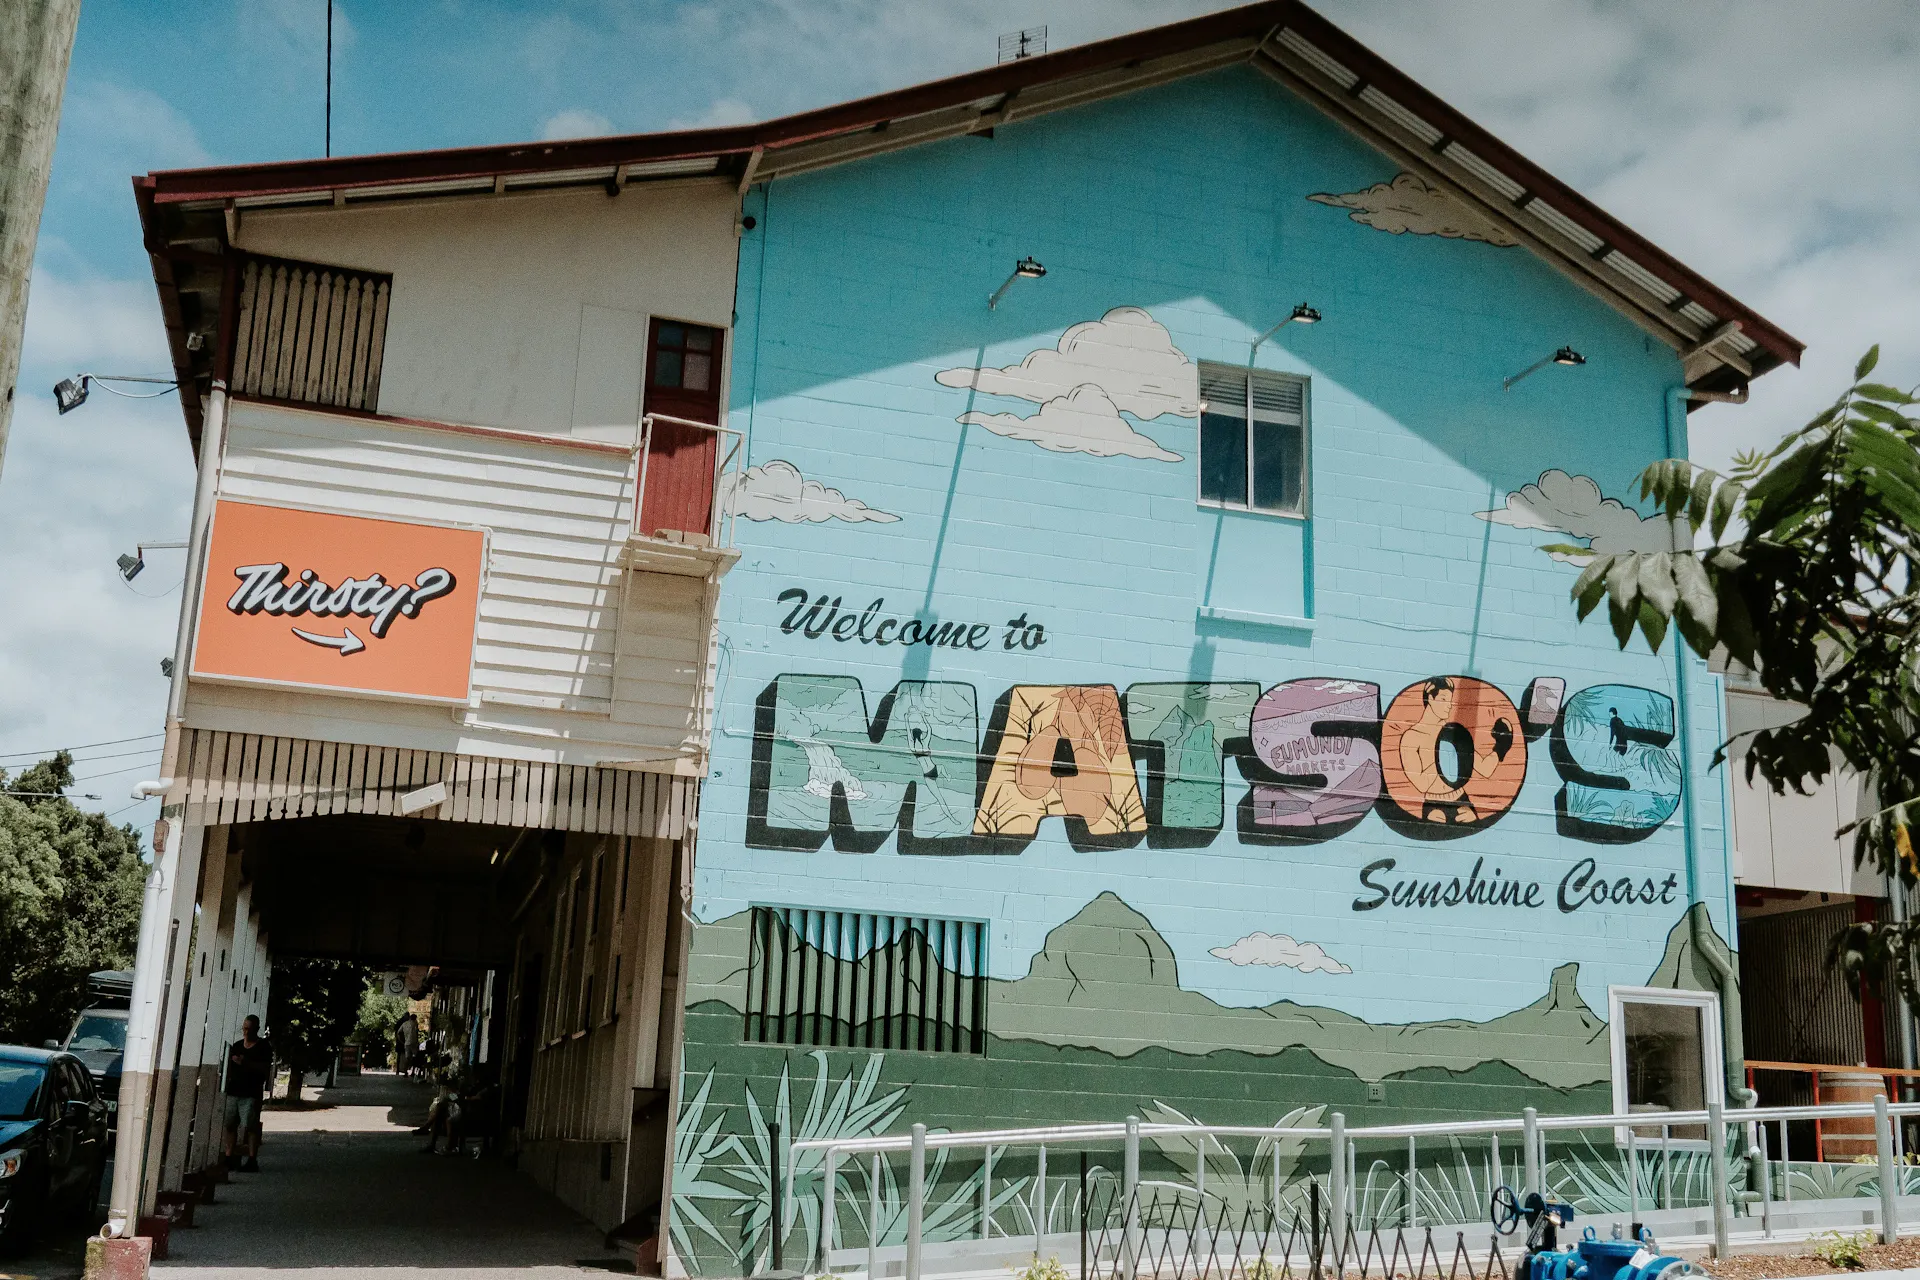 Matso's Sunshine Coast entrance mural on the side of the building